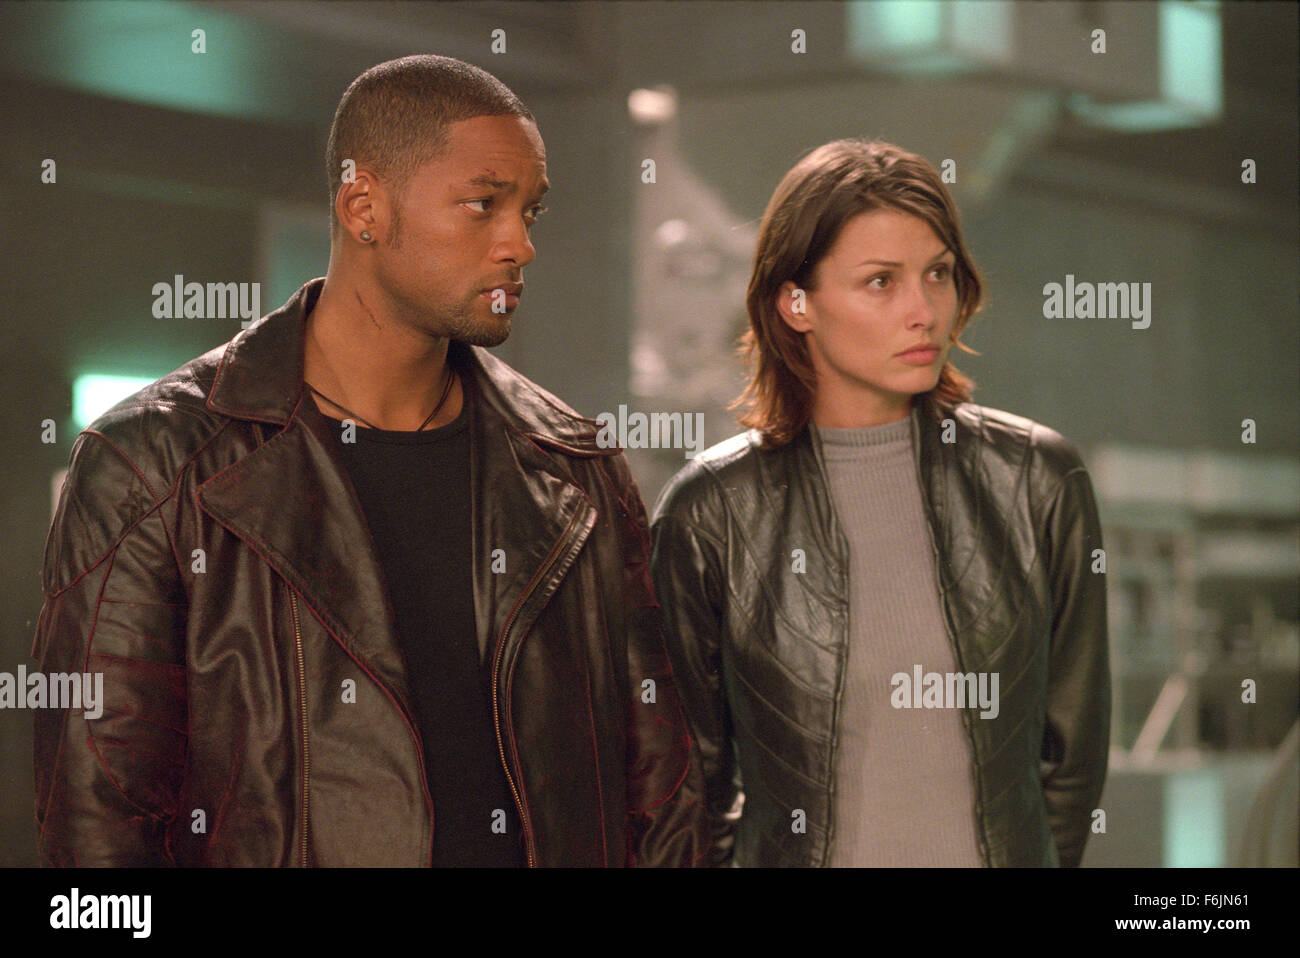 RELEASE DATE: July 16, 2004. MOVIE TITLE: I Robot. STUDIO: 20th Century Fox. PLOT: In the year 2035 a techno-phobic cop investigates a crime that may have been perpetrated by a robot, which leads to a larger threat to humanity. PICTURED: WILL SMITH as Del Spooner and BRIDGET MOYNAHAN as Susan Calvin. Stock Photo